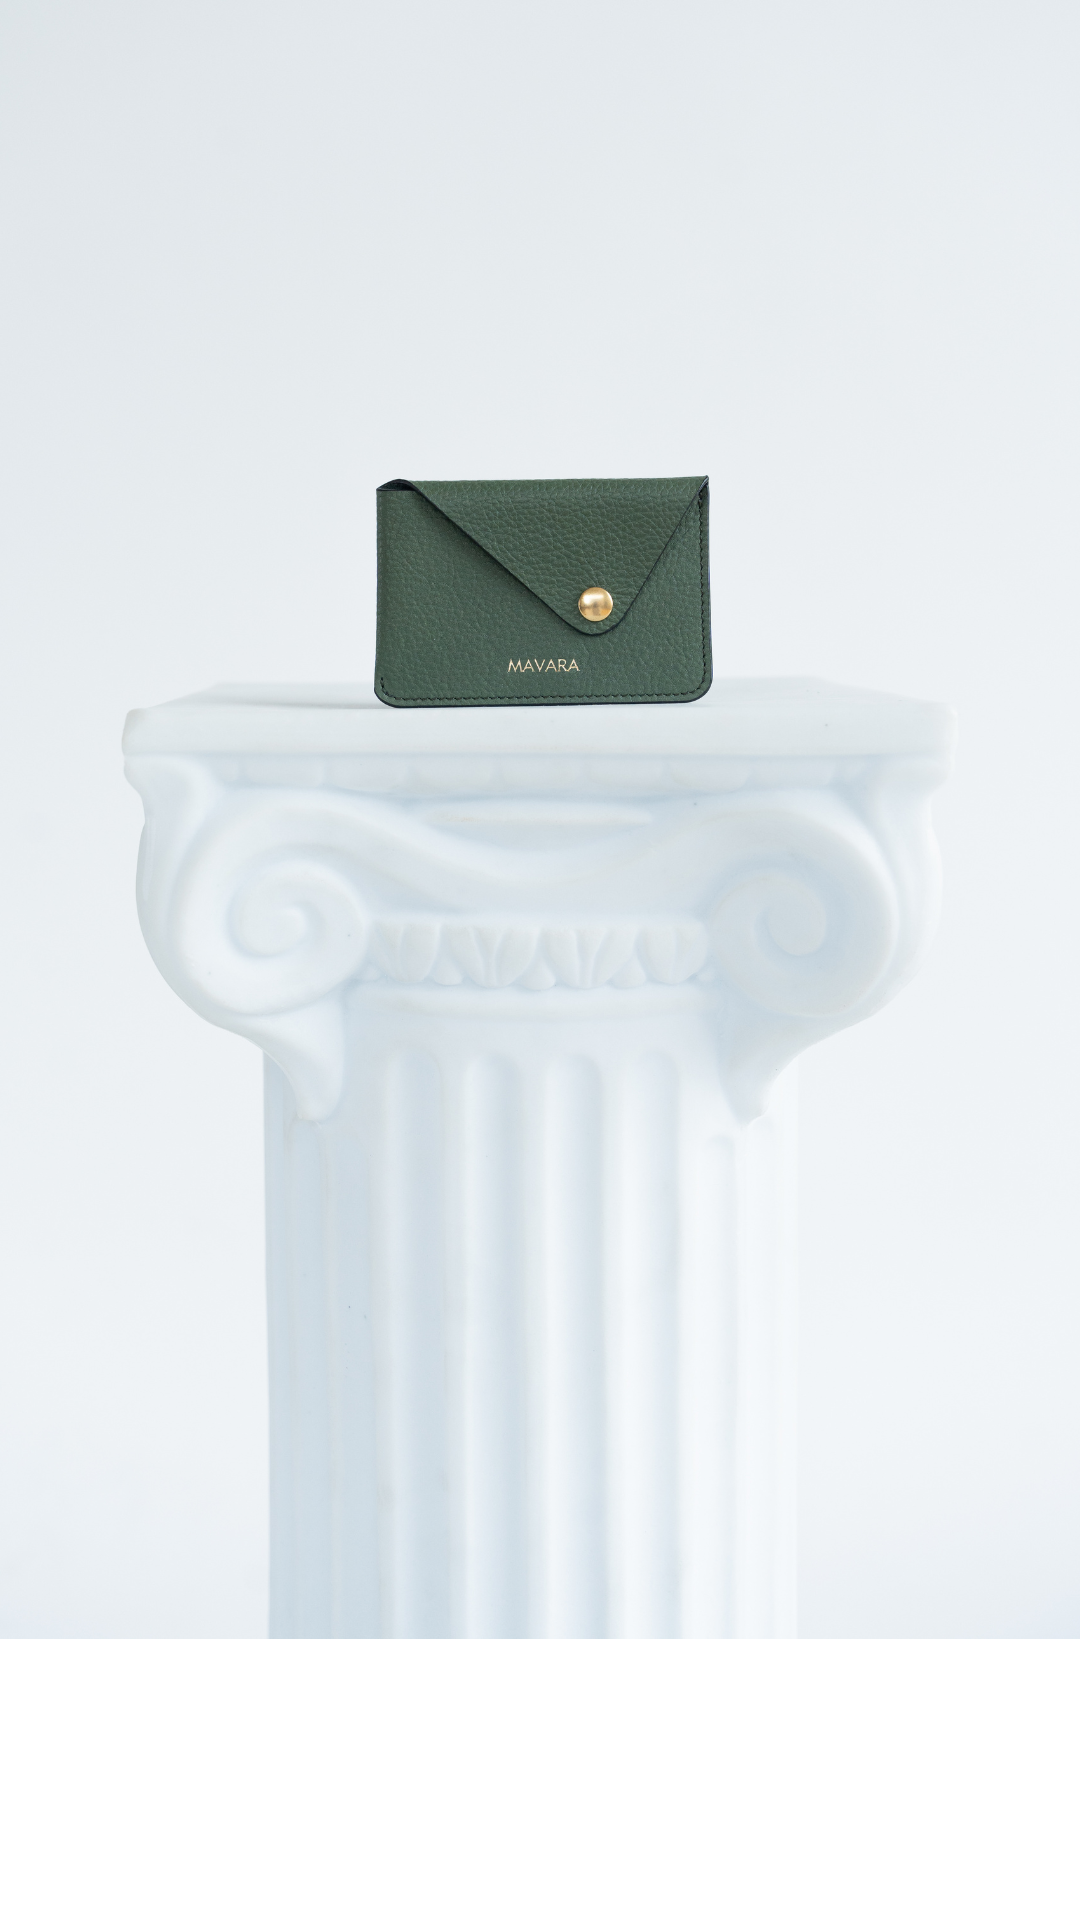 Green Leather Card Holder